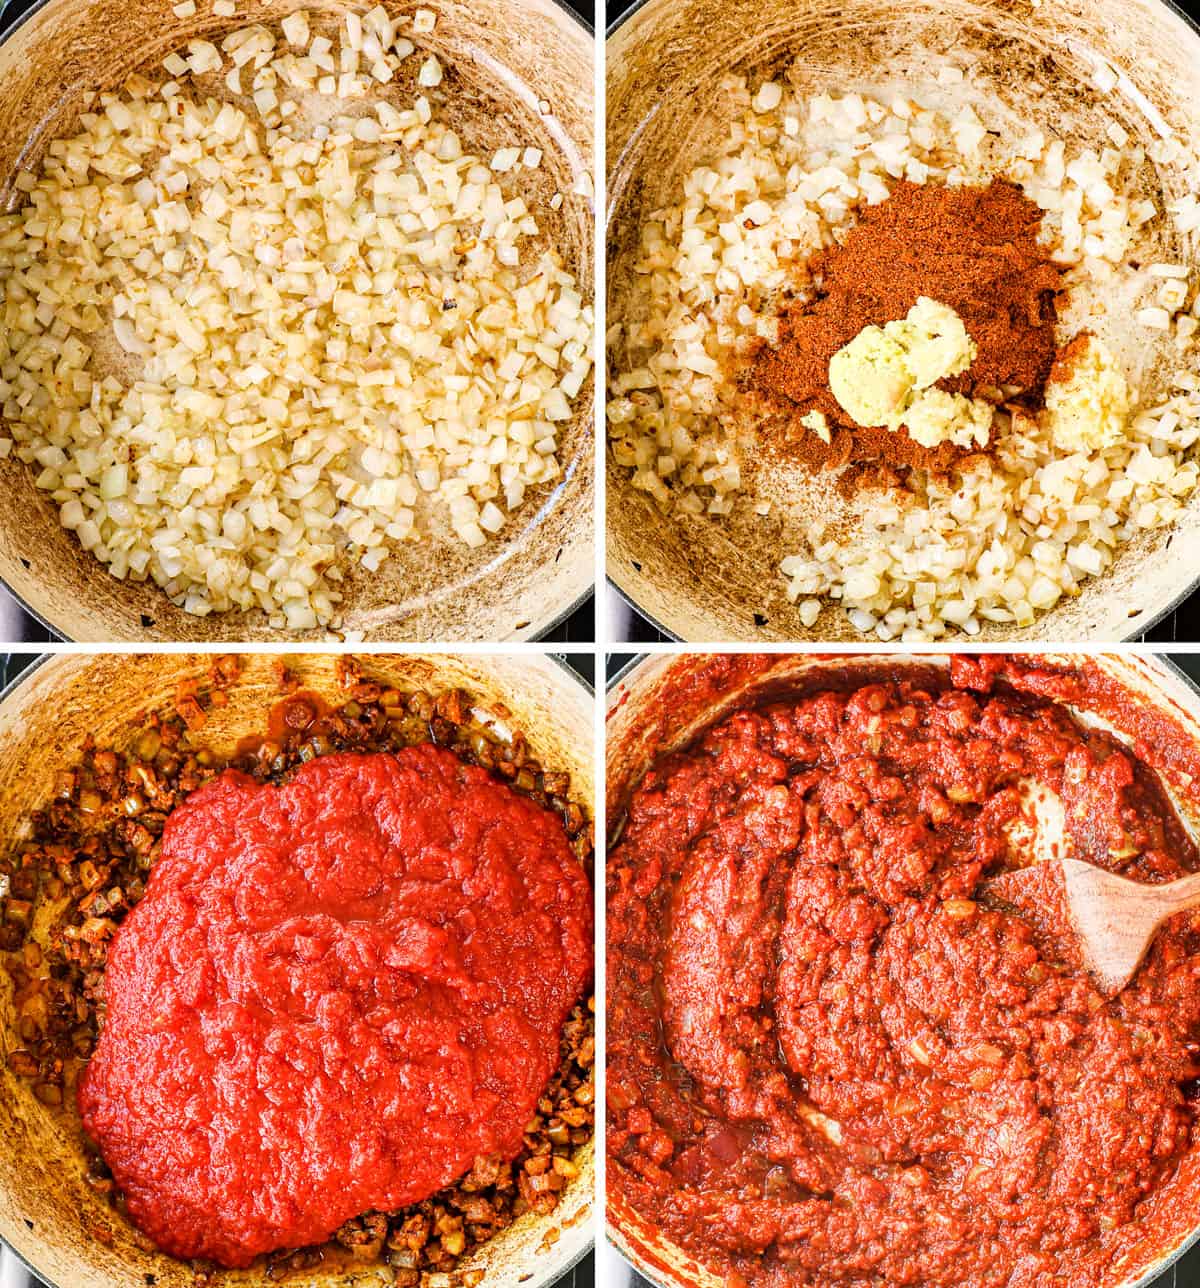 a collage showing how to make Chicken Tikka Masala recipe by 1) sautéing onions, sautéing spices, garlic and ginger, 3) adding crushed tomatoes, 3) simmering until reduced